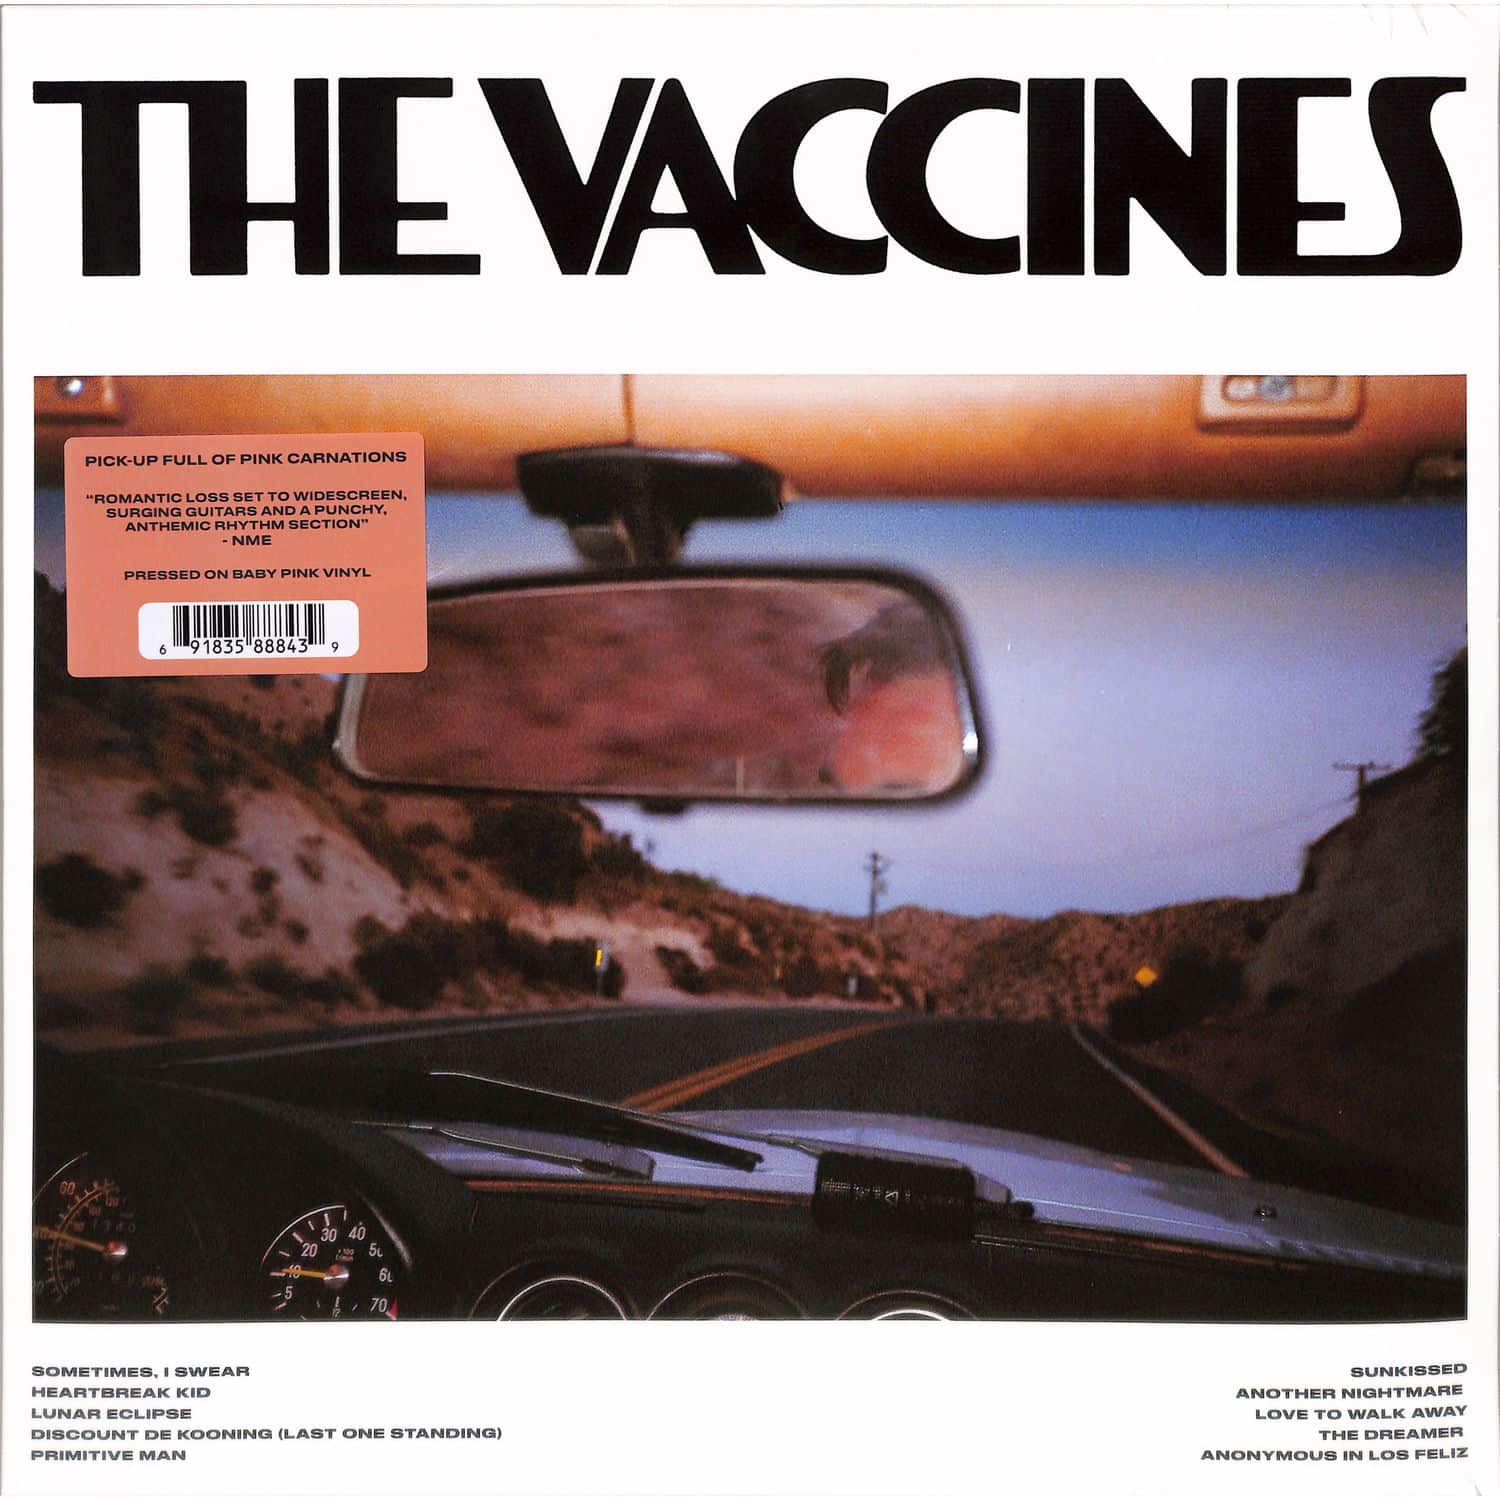 The Vaccines - PICK-UP FULL OF PINK CARNATIONS 